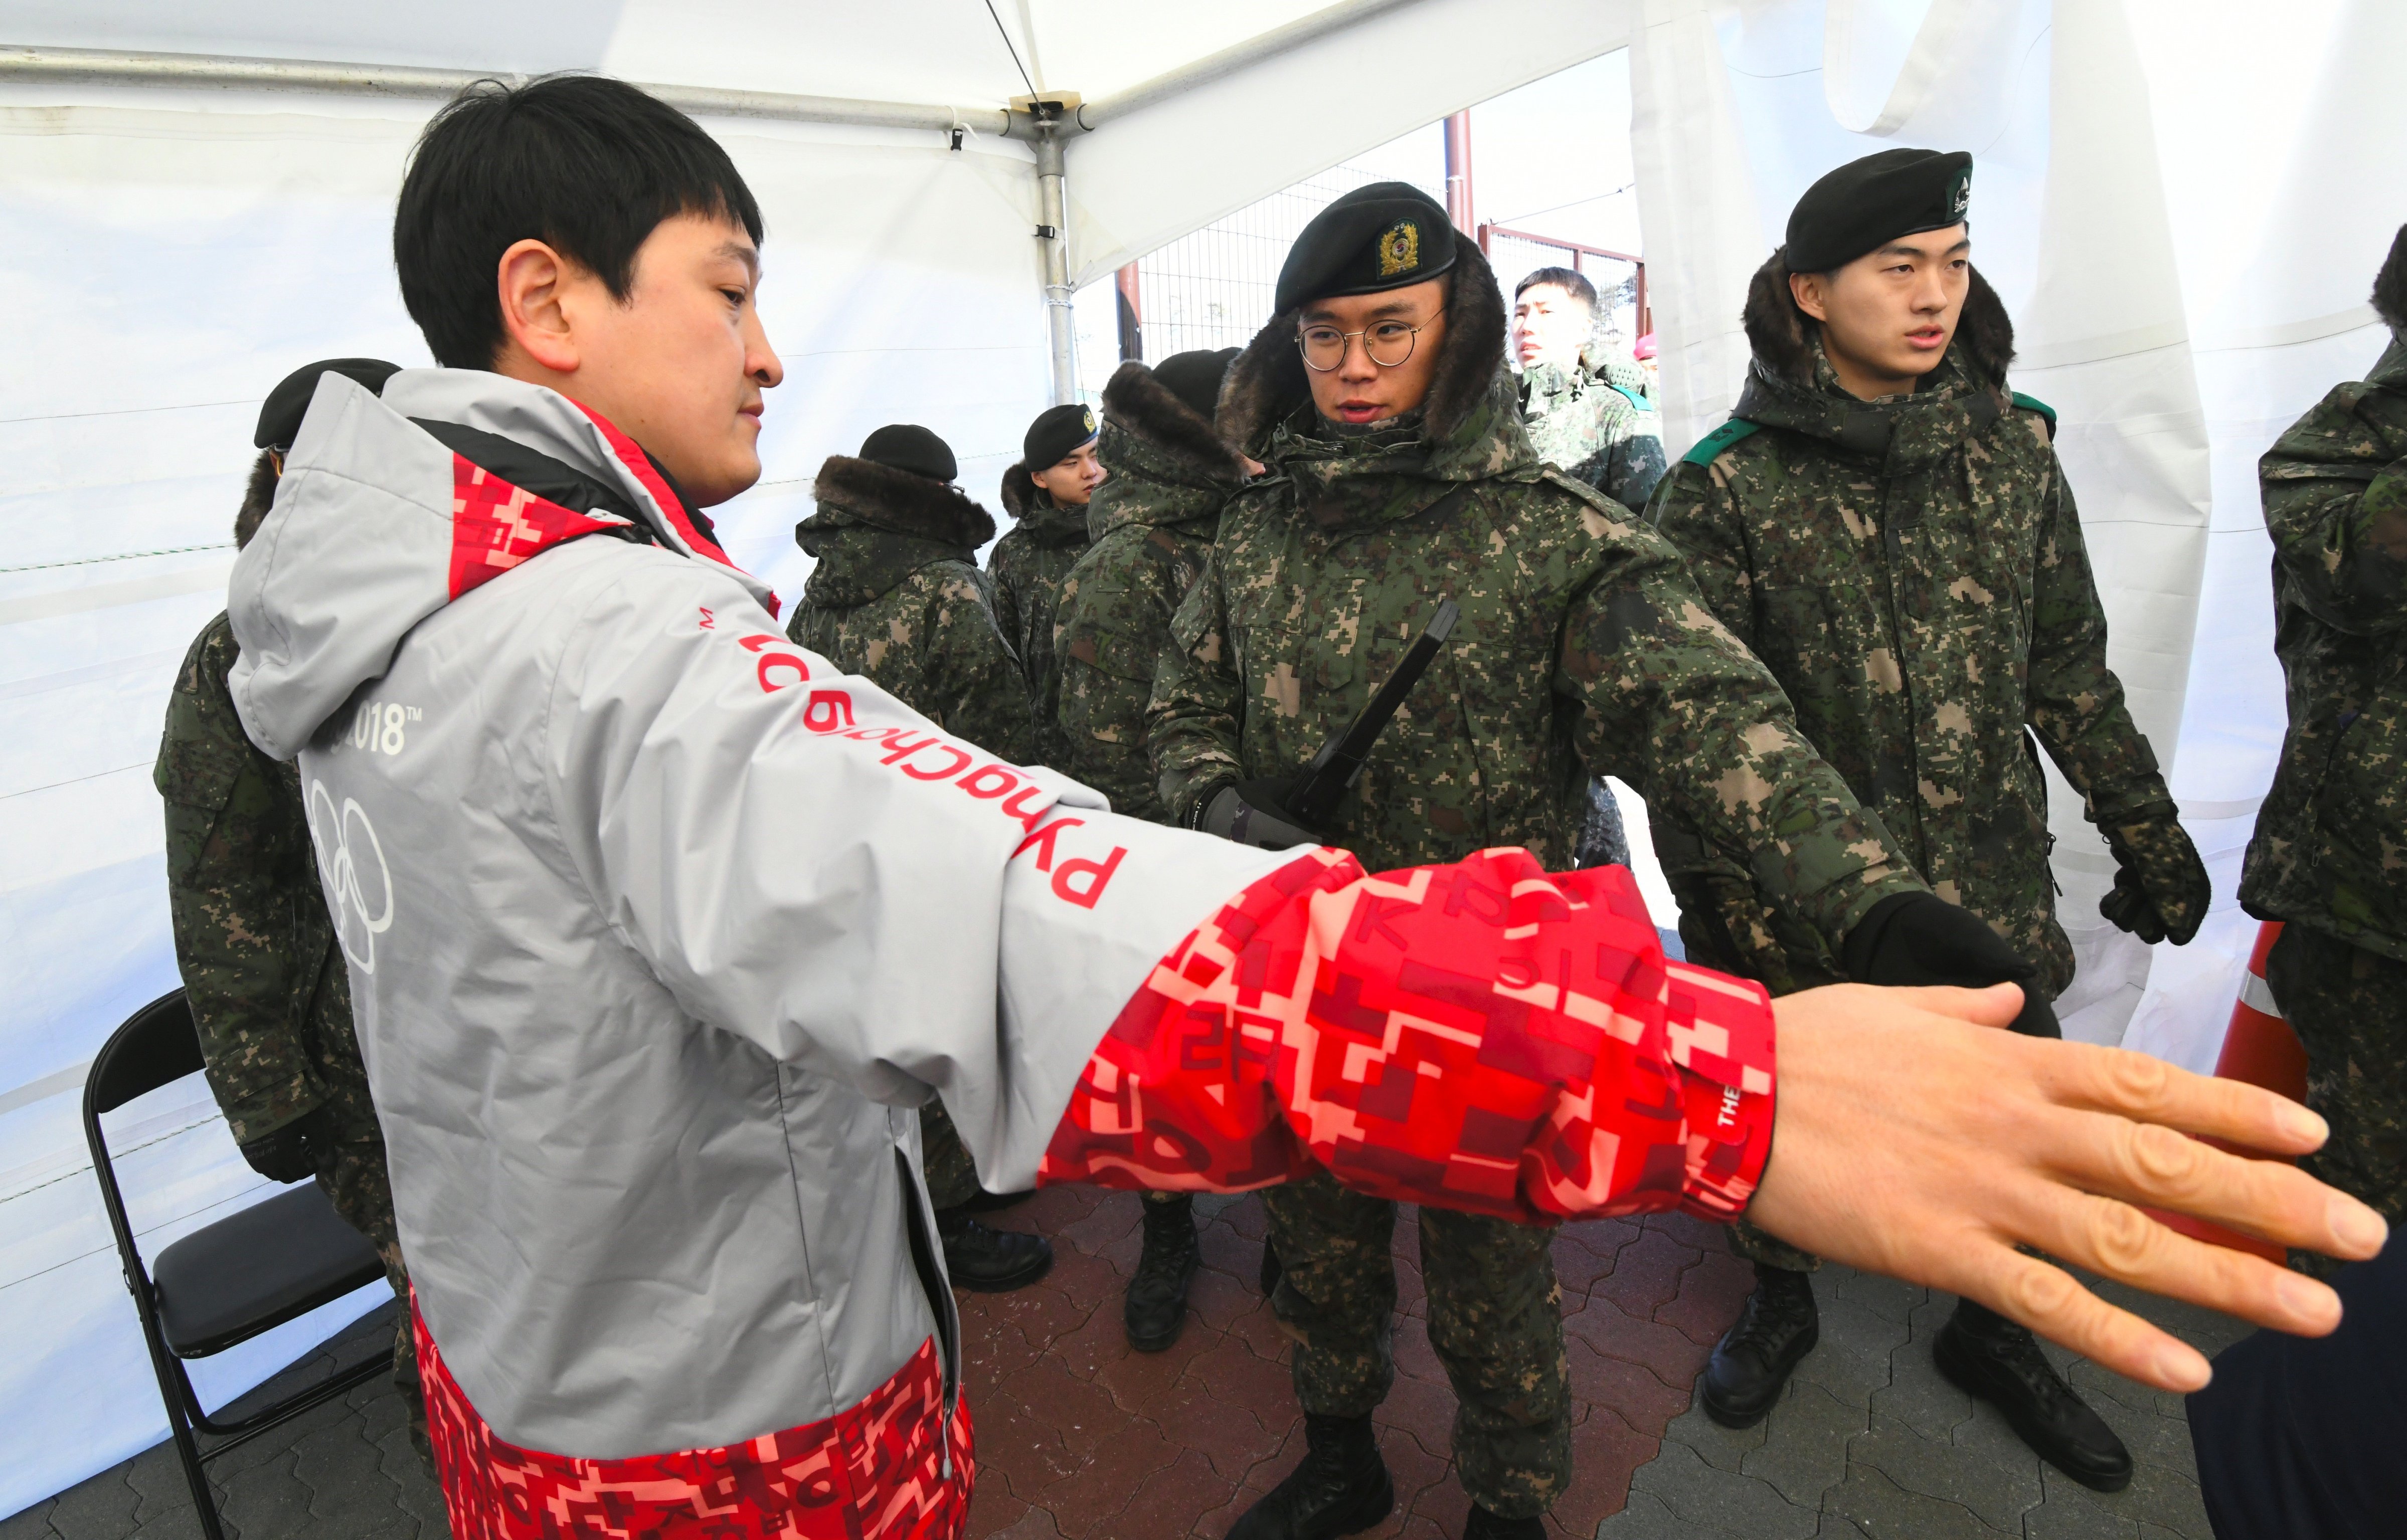 South Korean soldiers inspect a visitor at a security checkpoint as they replace security guards showing symptoms of the norovirus at the Gangneung Ice Arena in Gangneung on February 6, 2018 ahead of the Pyeongchang 2018 Winter Olympic Games.
                      According to officials at Korea Centers for Disease Control and Prevention and the PyeongChang Organizing Committee, three out of 41 guards who suffered from diarrhea and vomiting were diagnosed with having the norovirus on February 5. (JUNG YEON-JE/AFP—Getty Images)